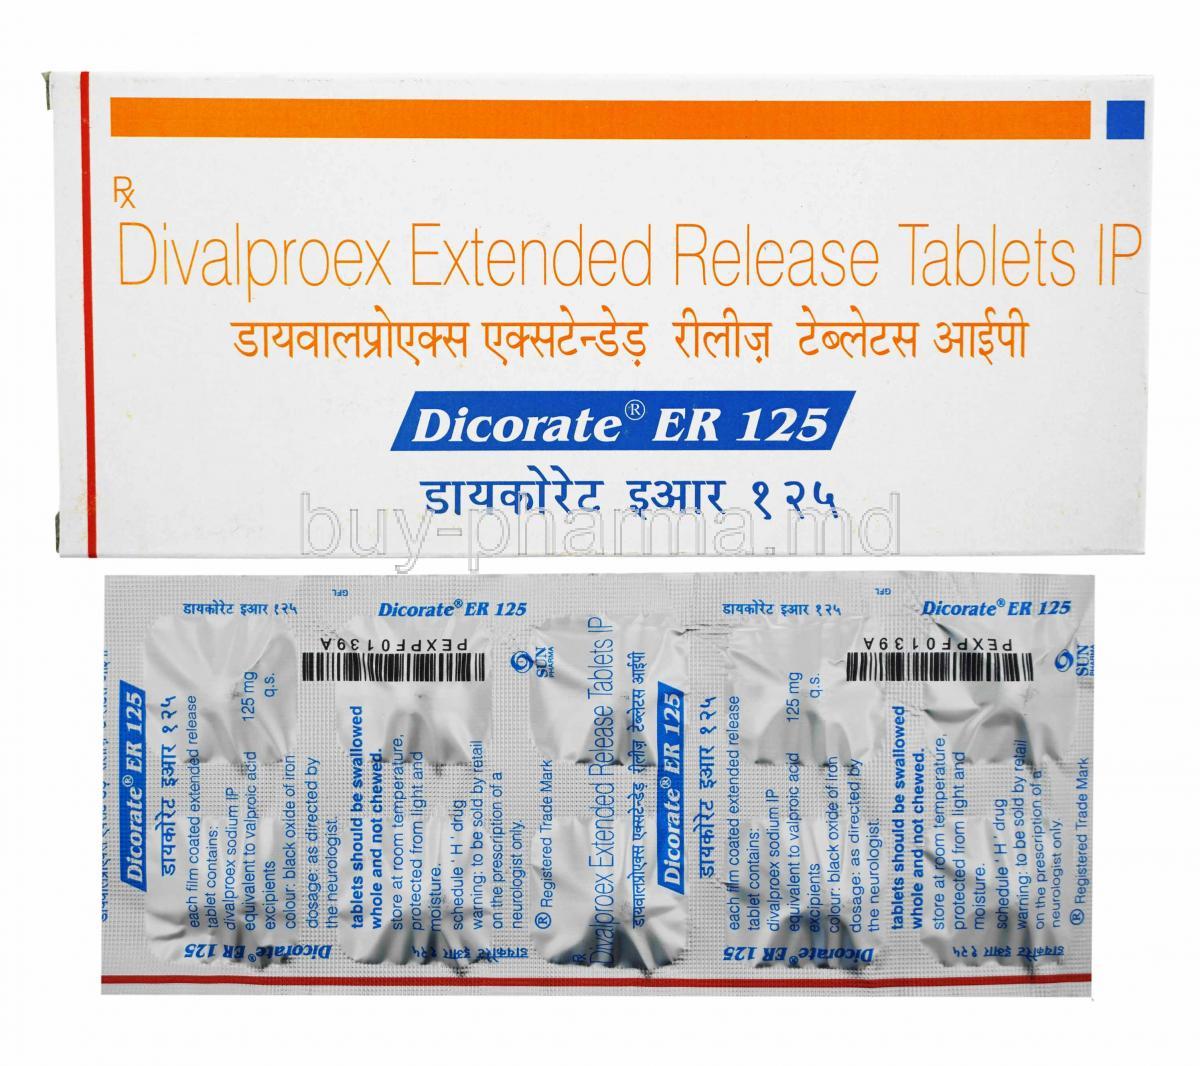 Dicorate ER, Divalproex 125mg box and tablets